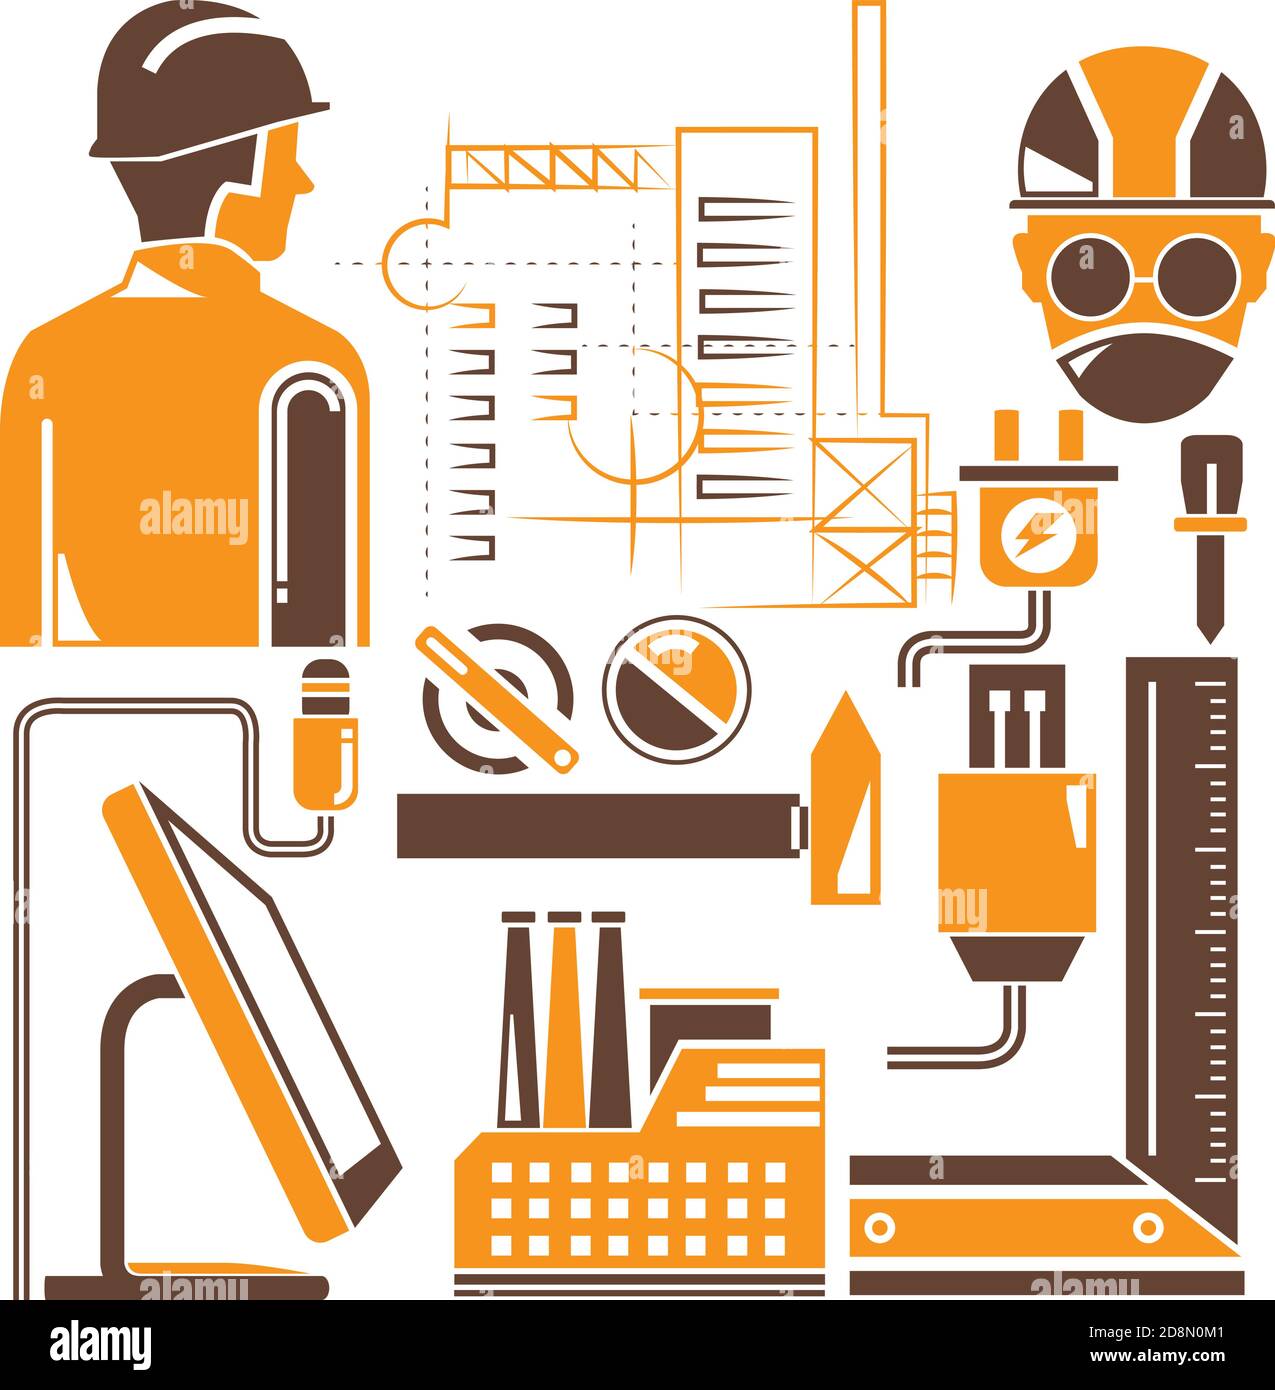 engineering tools and industrial management icons set Stock Vector